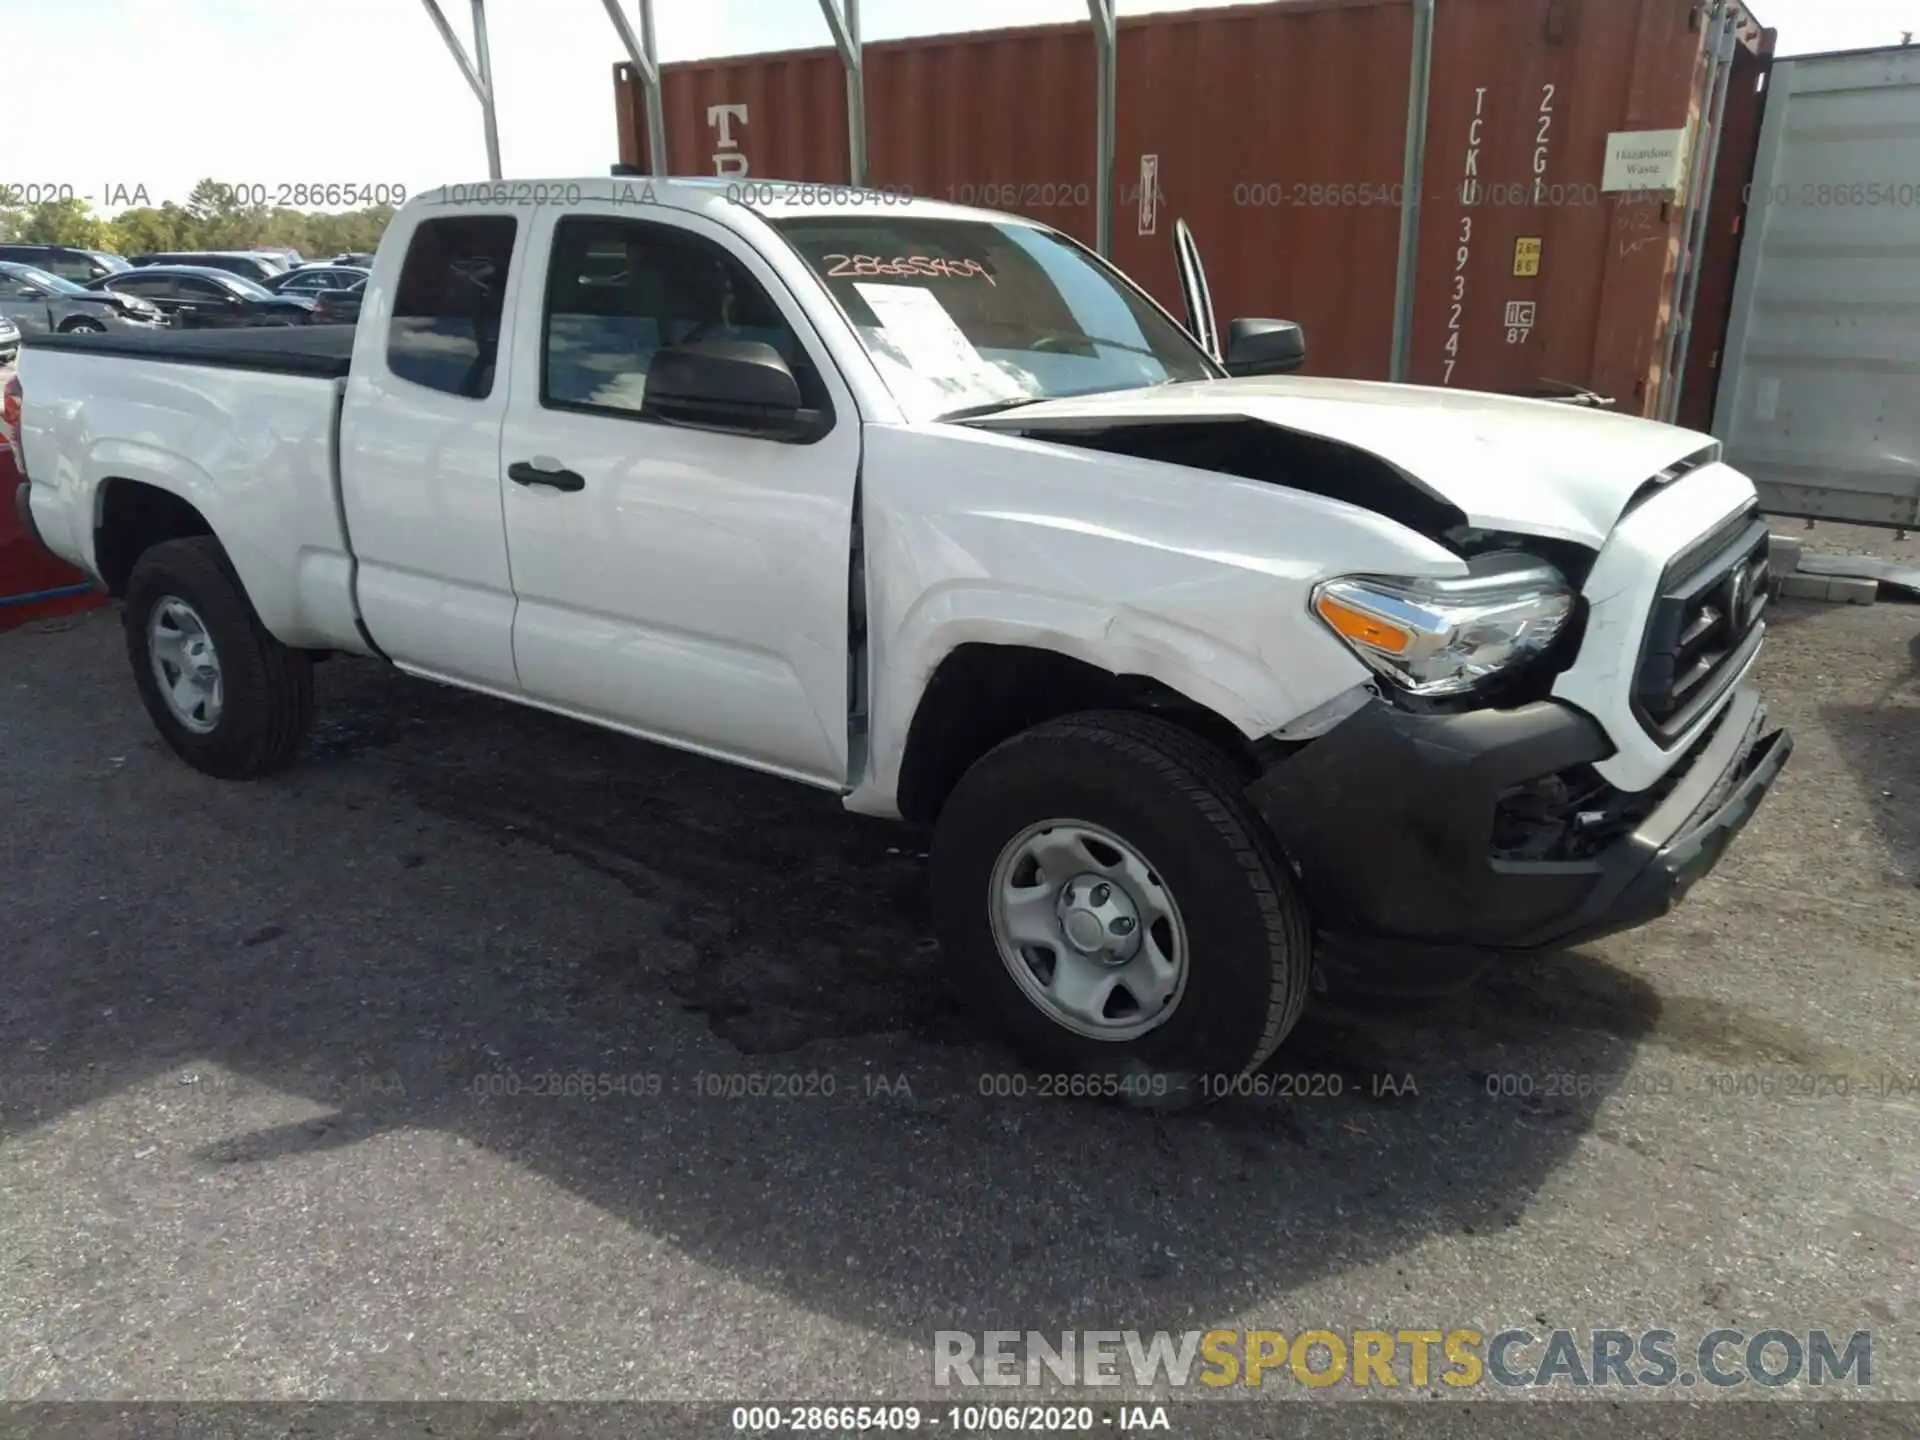 1 Photograph of a damaged car 5TFRX5GN9LX171570 TOYOTA TACOMA 2WD 2020